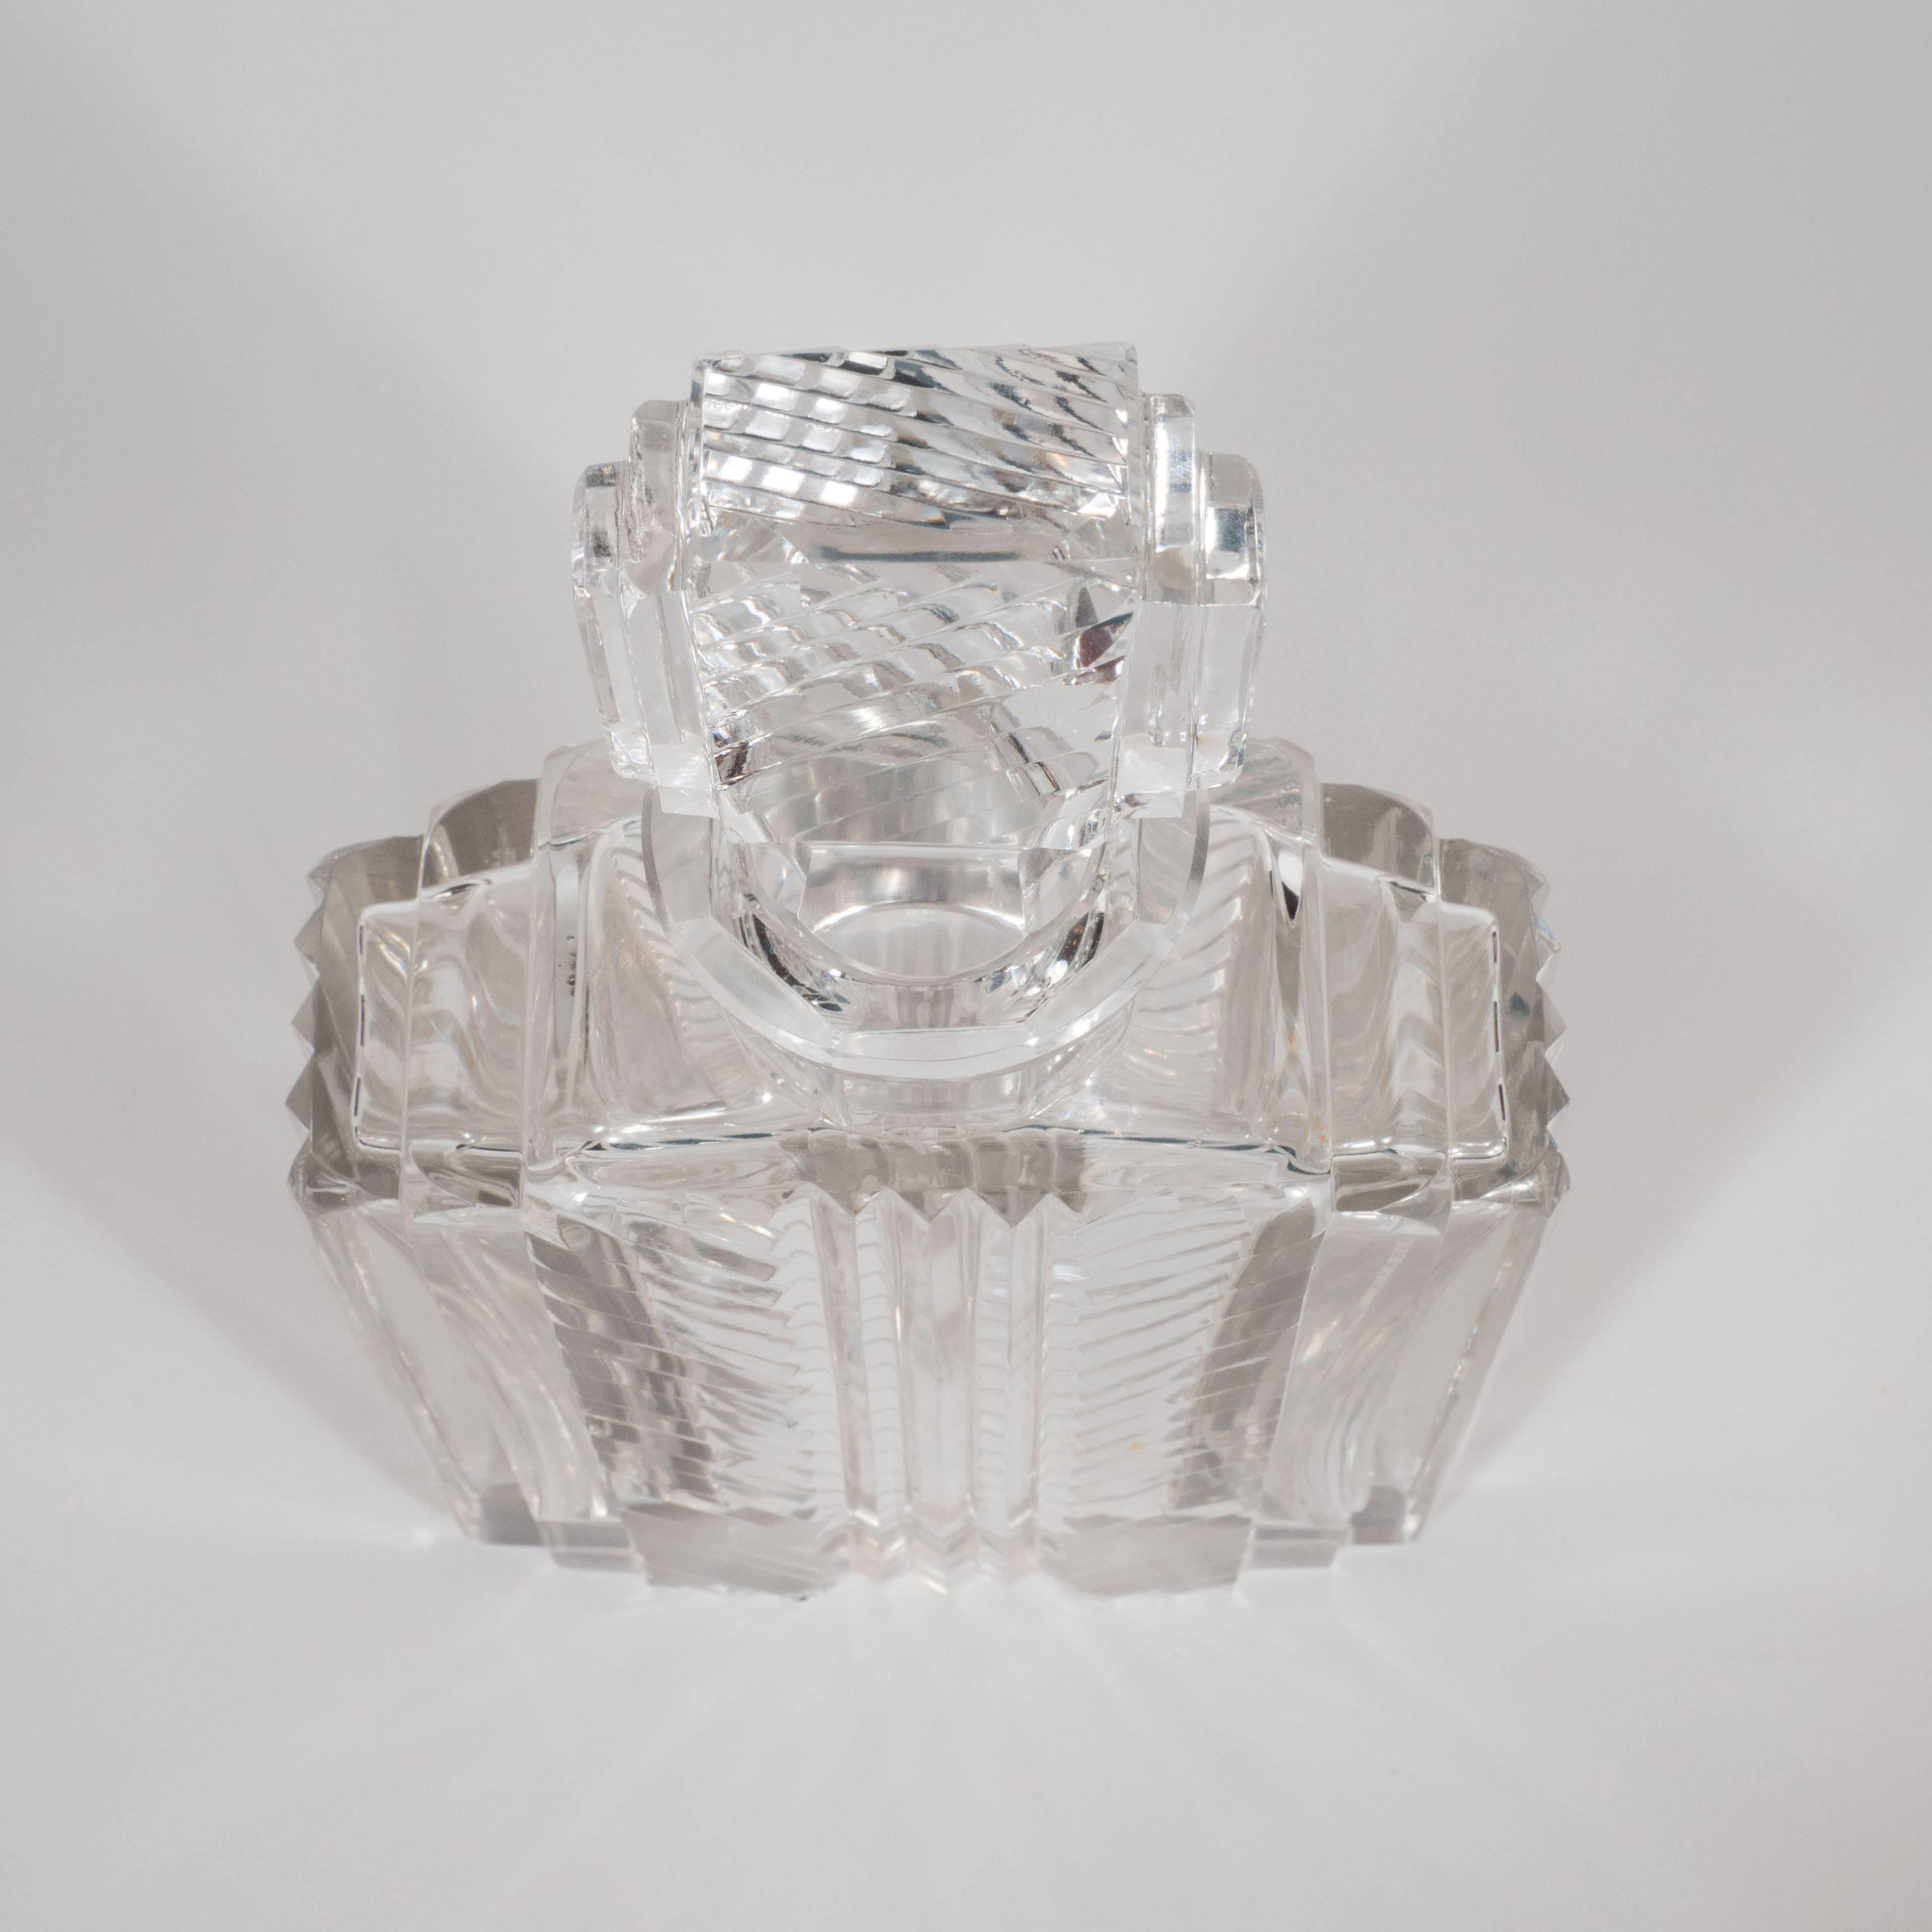 Mid-20th Century Exquisite Skyscraper Style Crystal Art Deco Hand-Cut & Beveled Crystal Decanter